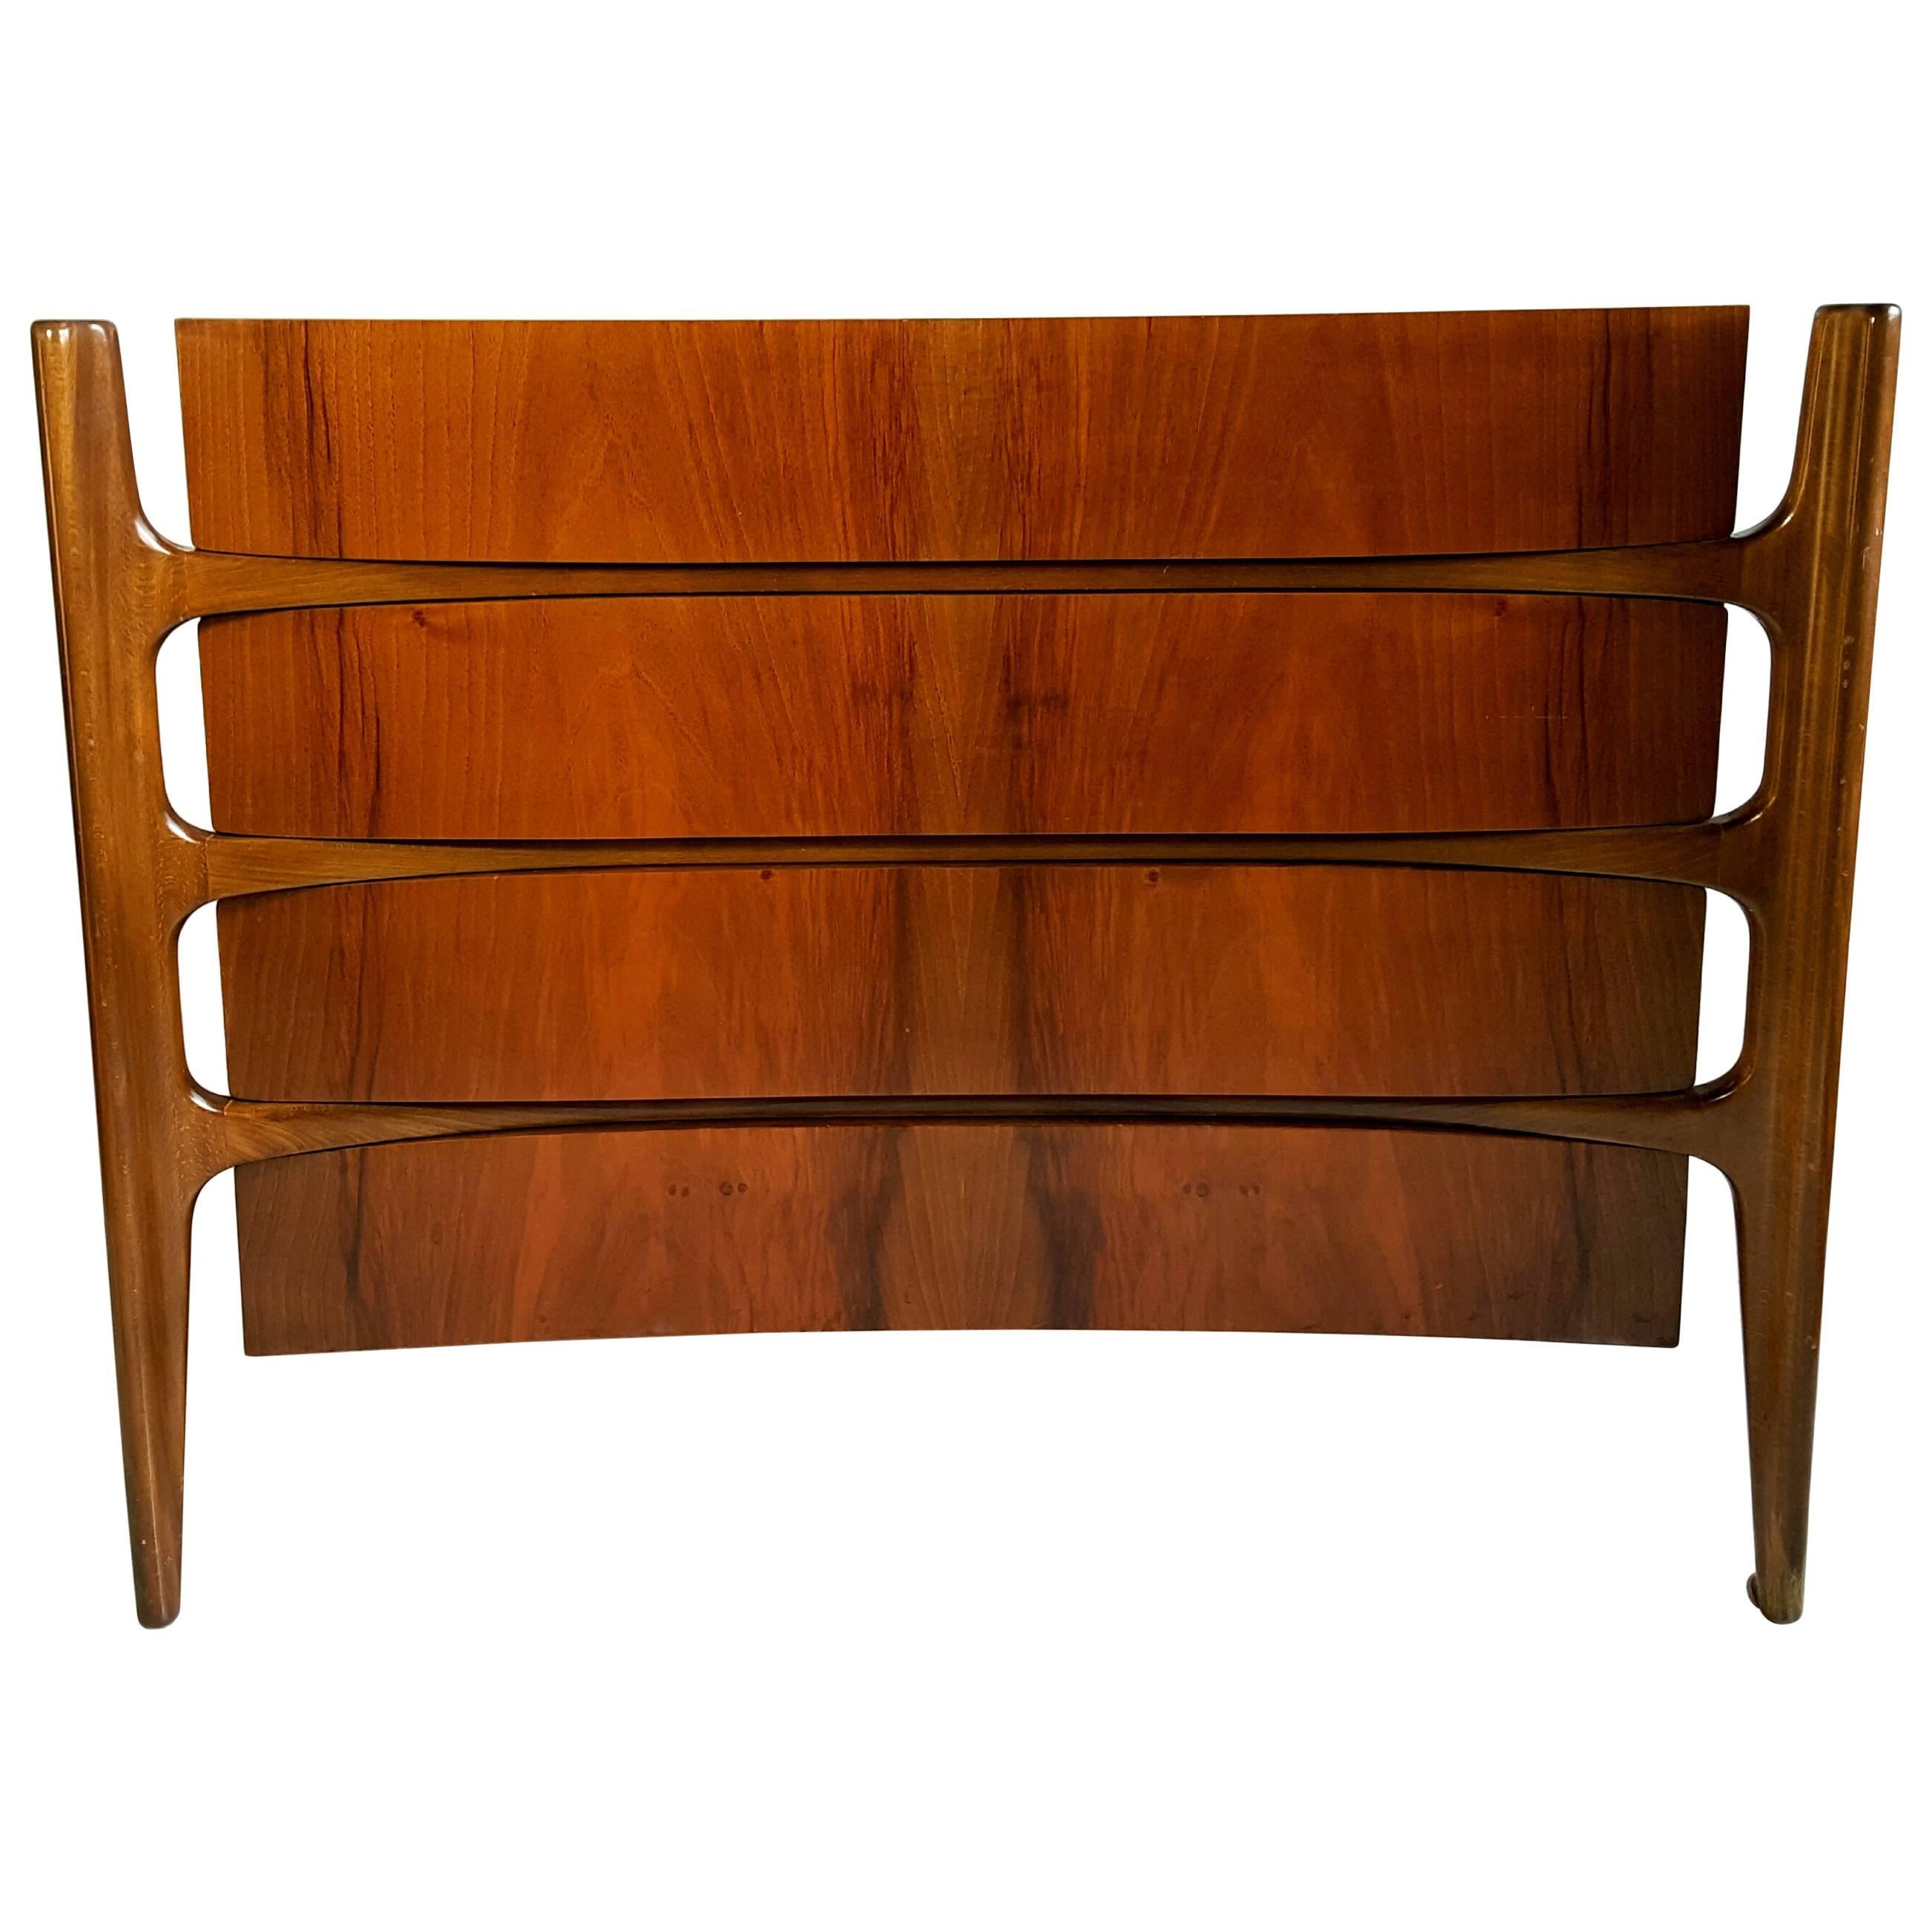 Rare William Hinn Curved Chest of Drawers in Walnut with Skeletal Frame For Sale